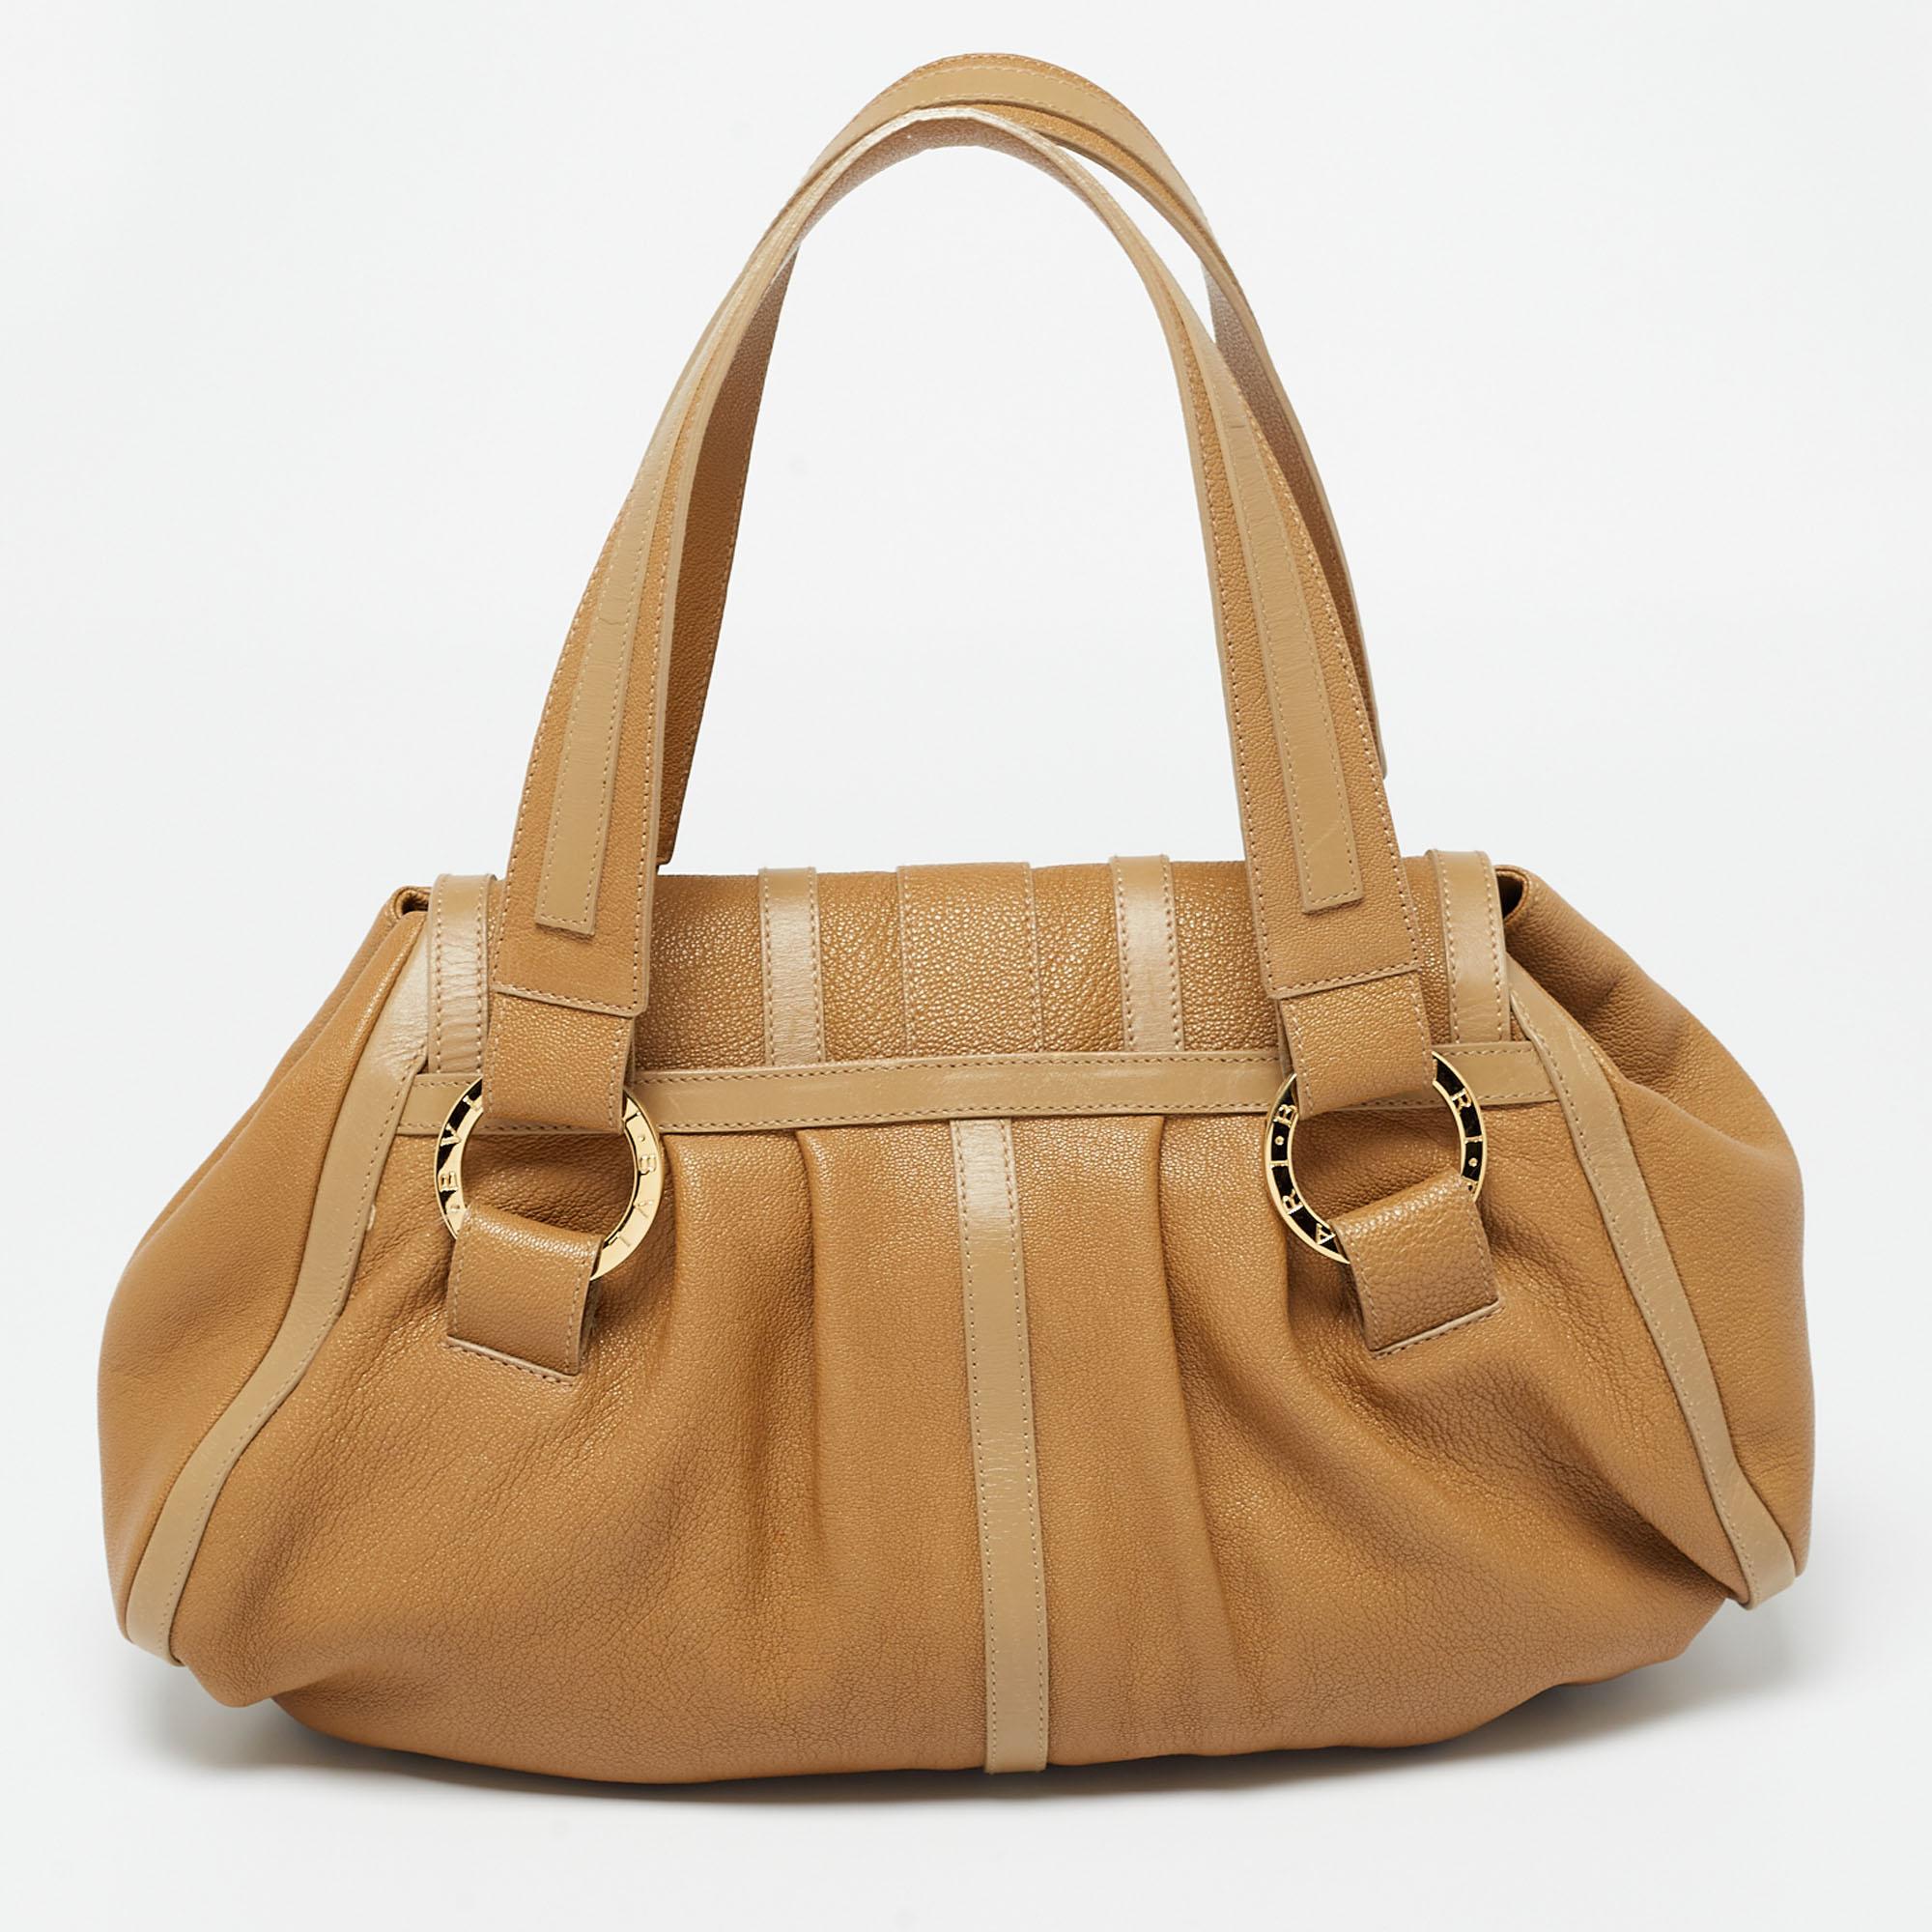 This shoulder bag from Bvlgari is a fabulous piece. It has been crafted from leather in a gorgeous tan shade and is equipped with two handles and gold-tone accents. The spacious interior comes with a zipped pocket.

Includes: Info Booklet